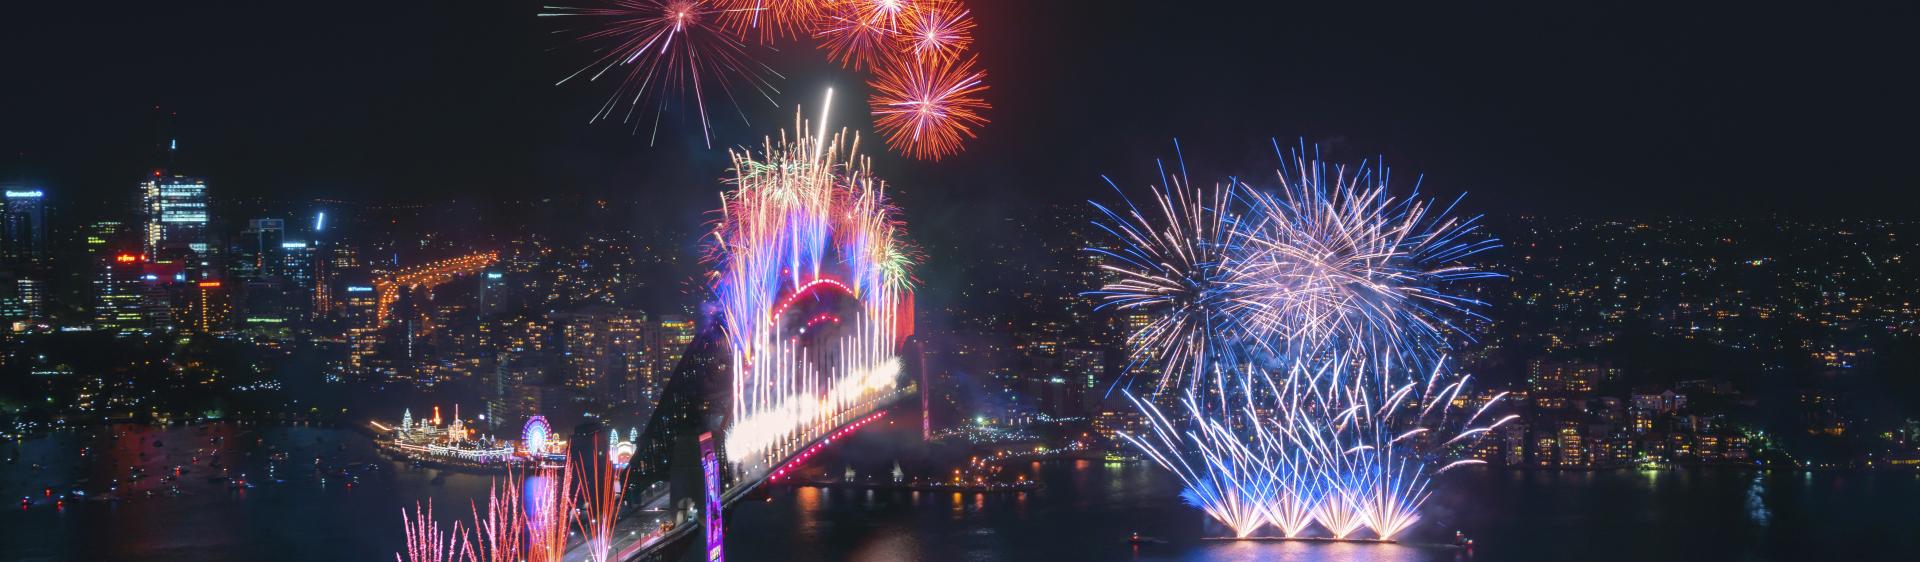 Spectacular midnight fireworks display across Sydney Harbour at to celebrate the start of the new year 2020, Sydney